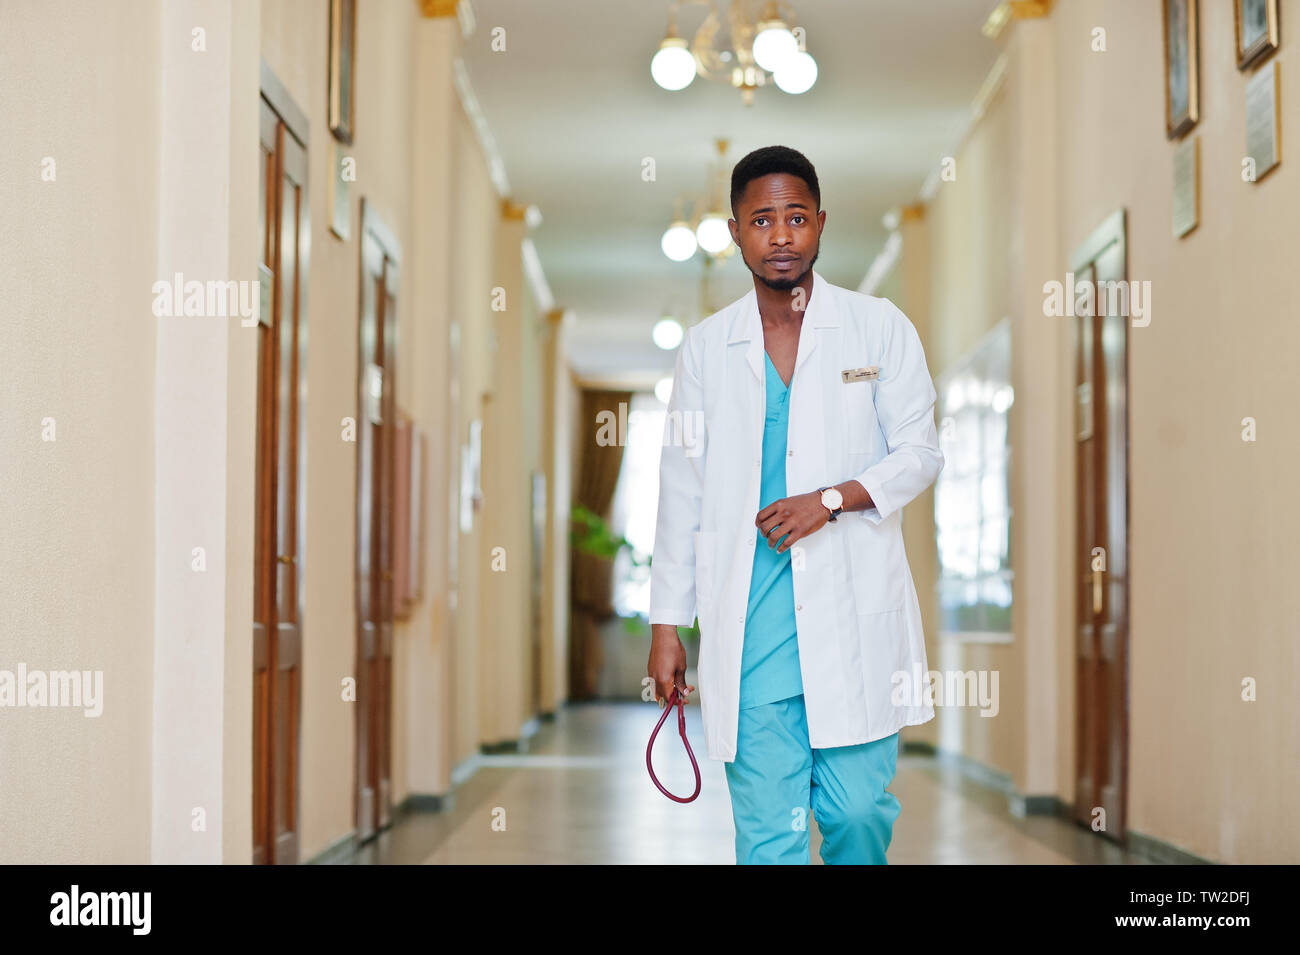 Professional african male doctor at the hospital. Medical healthcare business and doctor service of Africa. Stock Photo